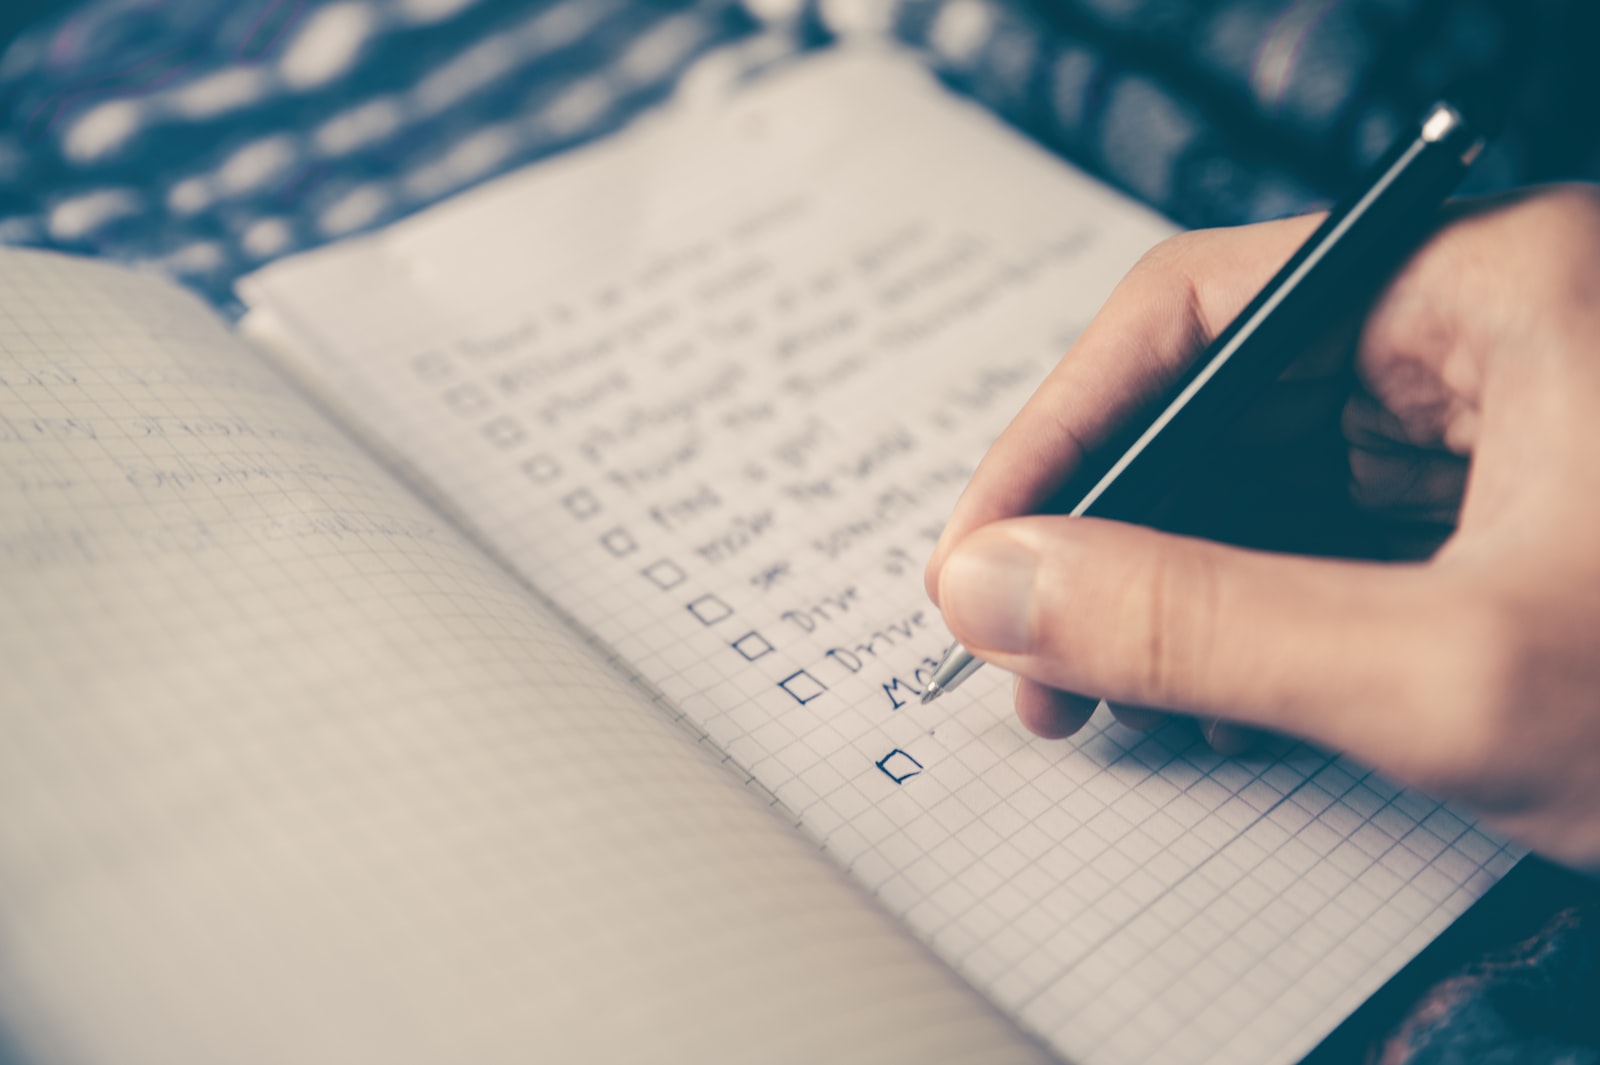 Employee performance review checklist